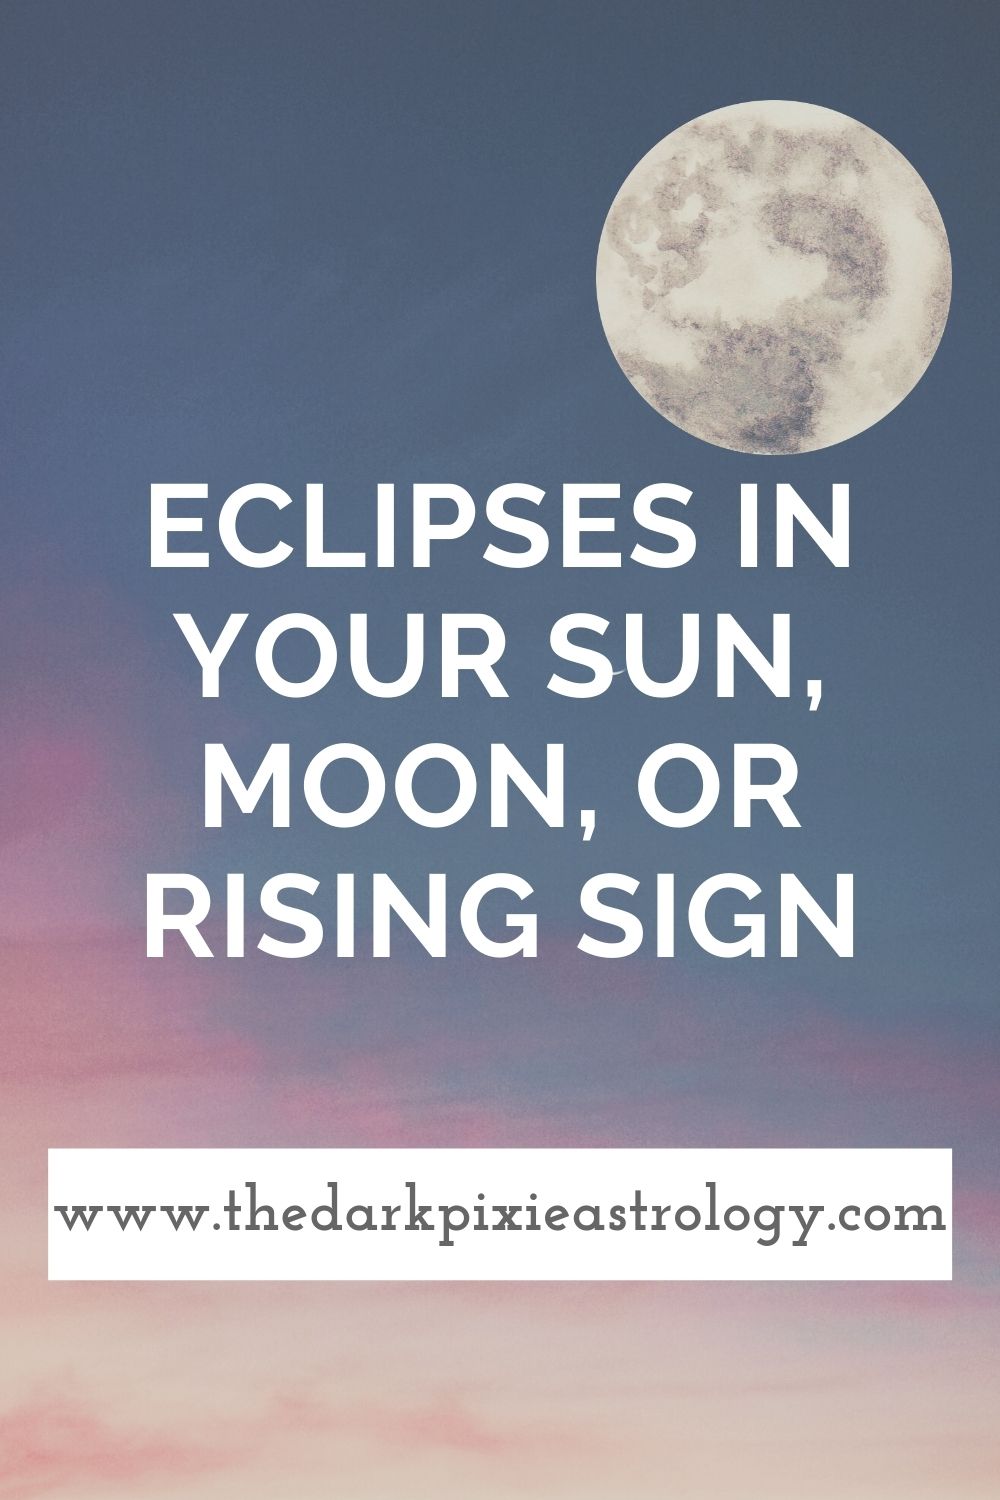 Eclipses in Your Sun, Moon, or Rising Sign - The Dark Pixie Astrology